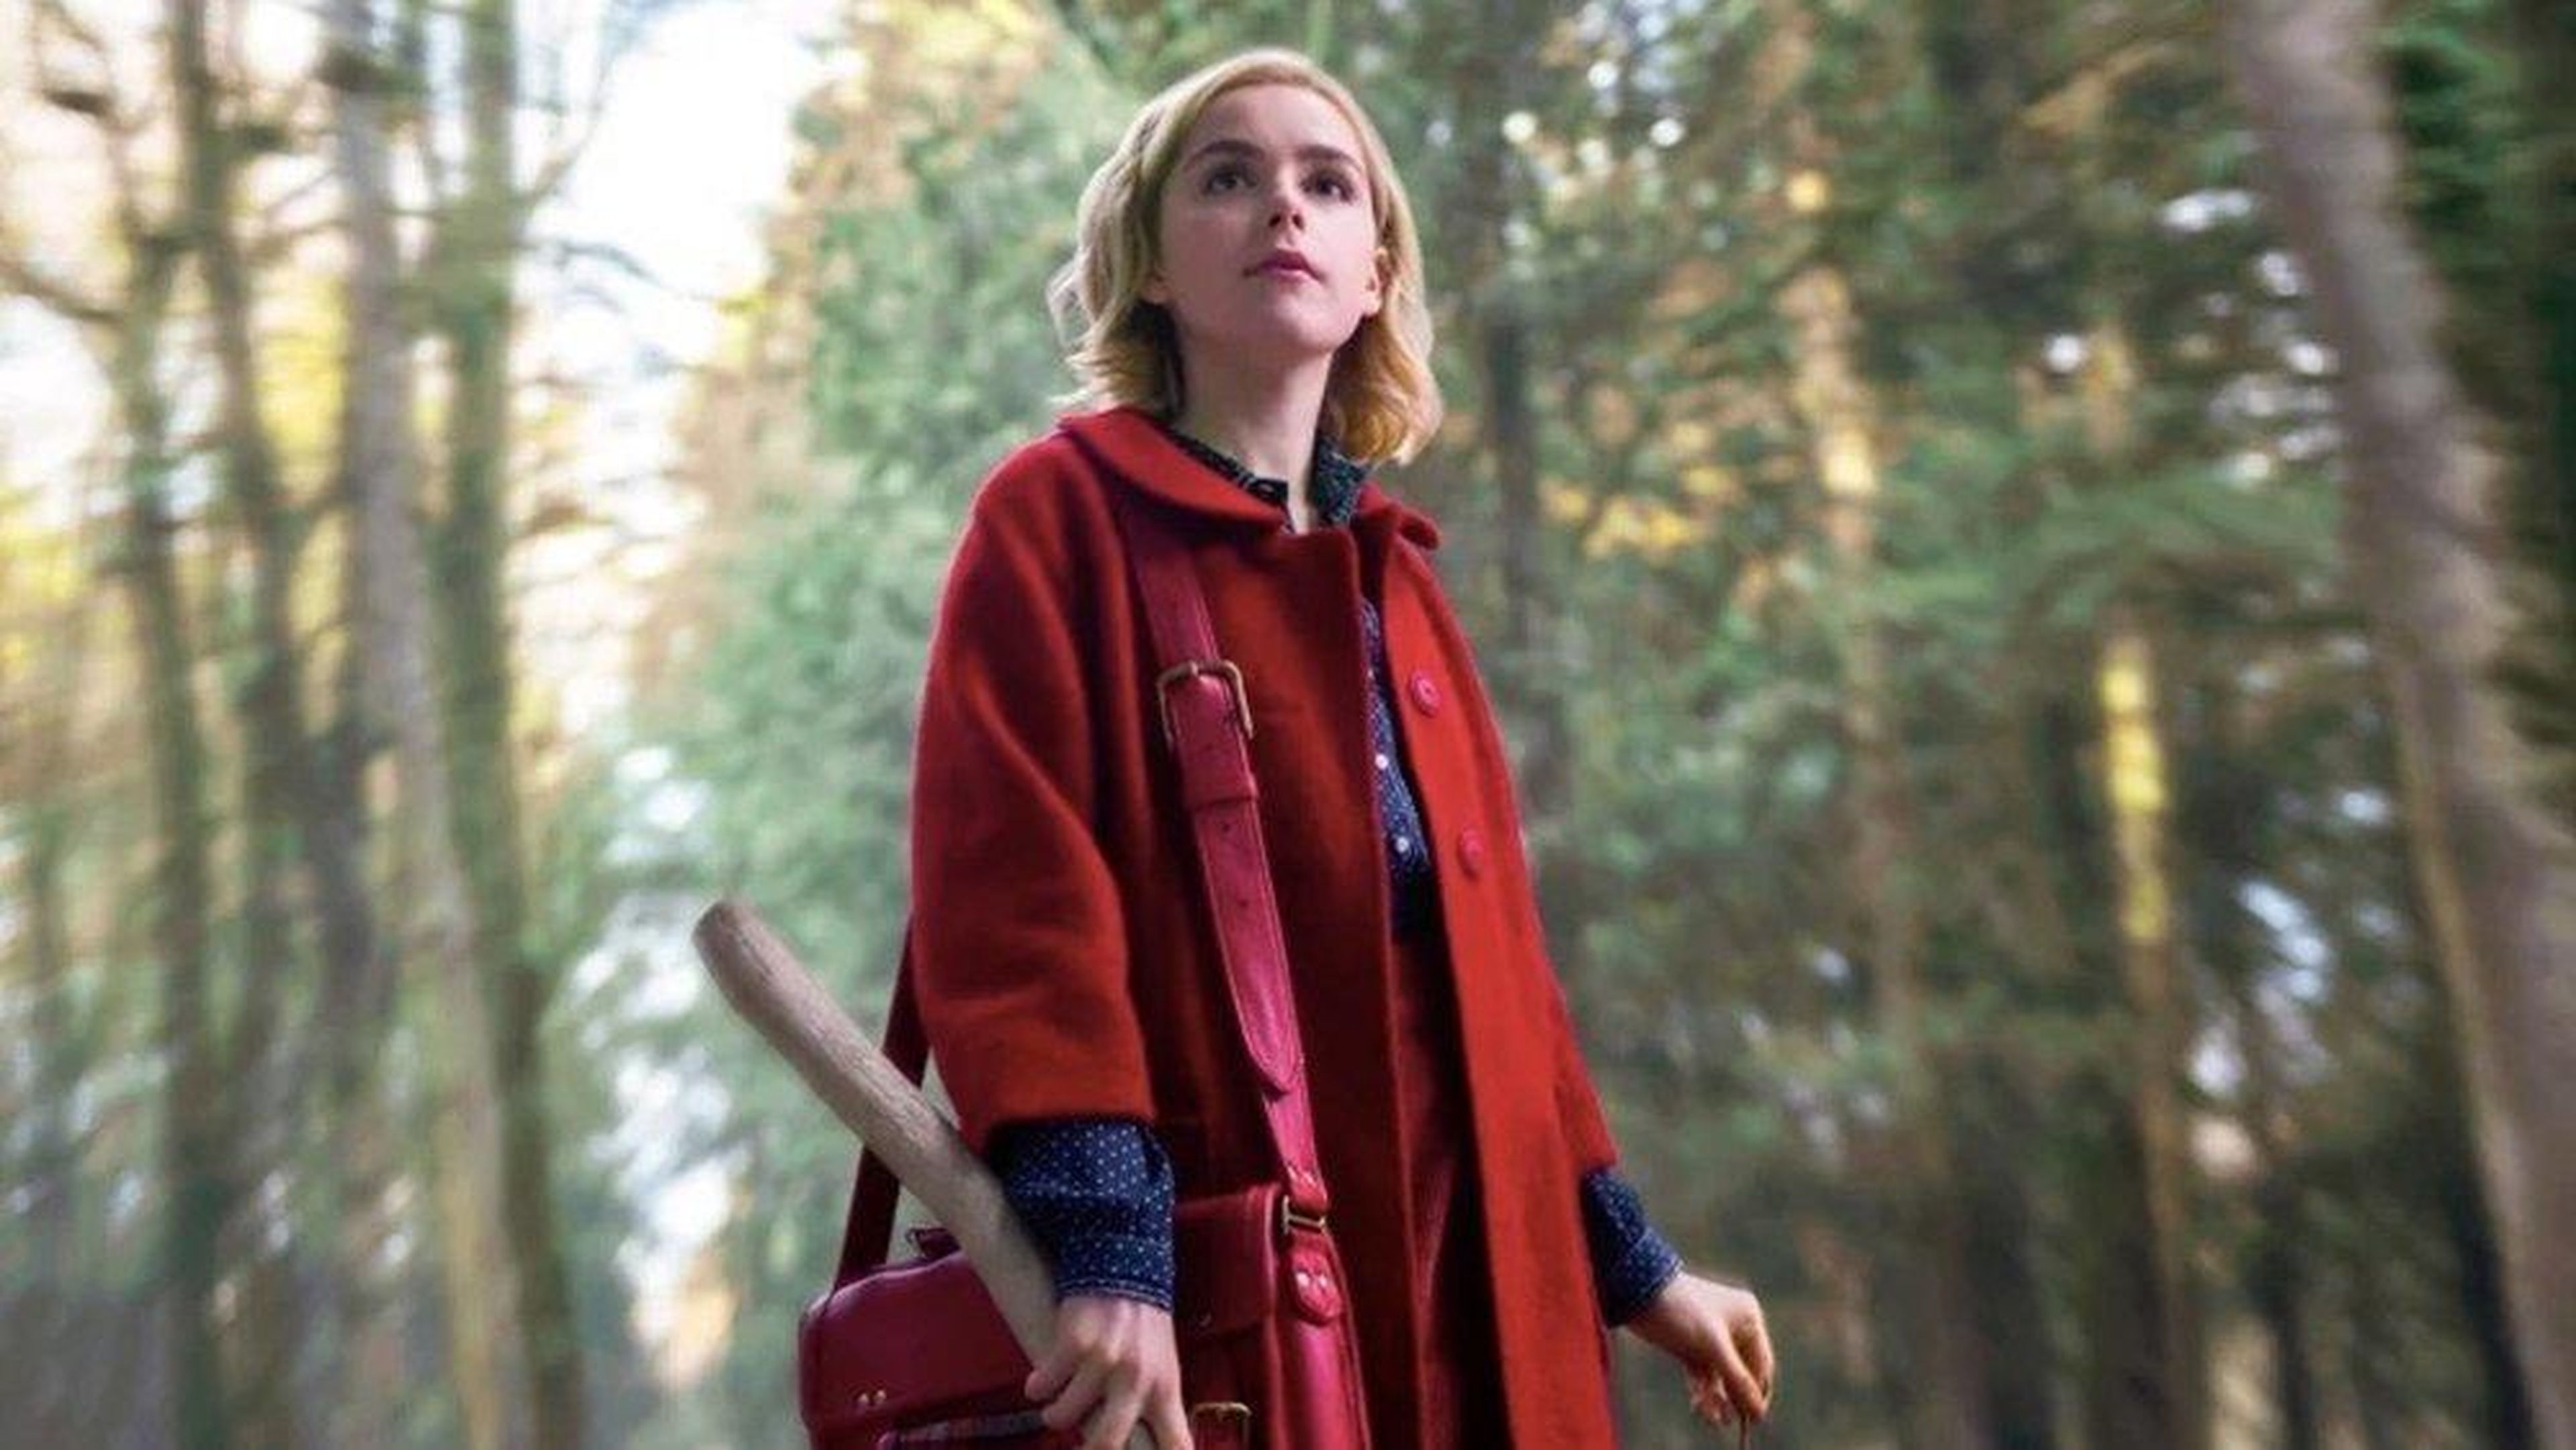 "The Chilling Adventures of Sabrina"